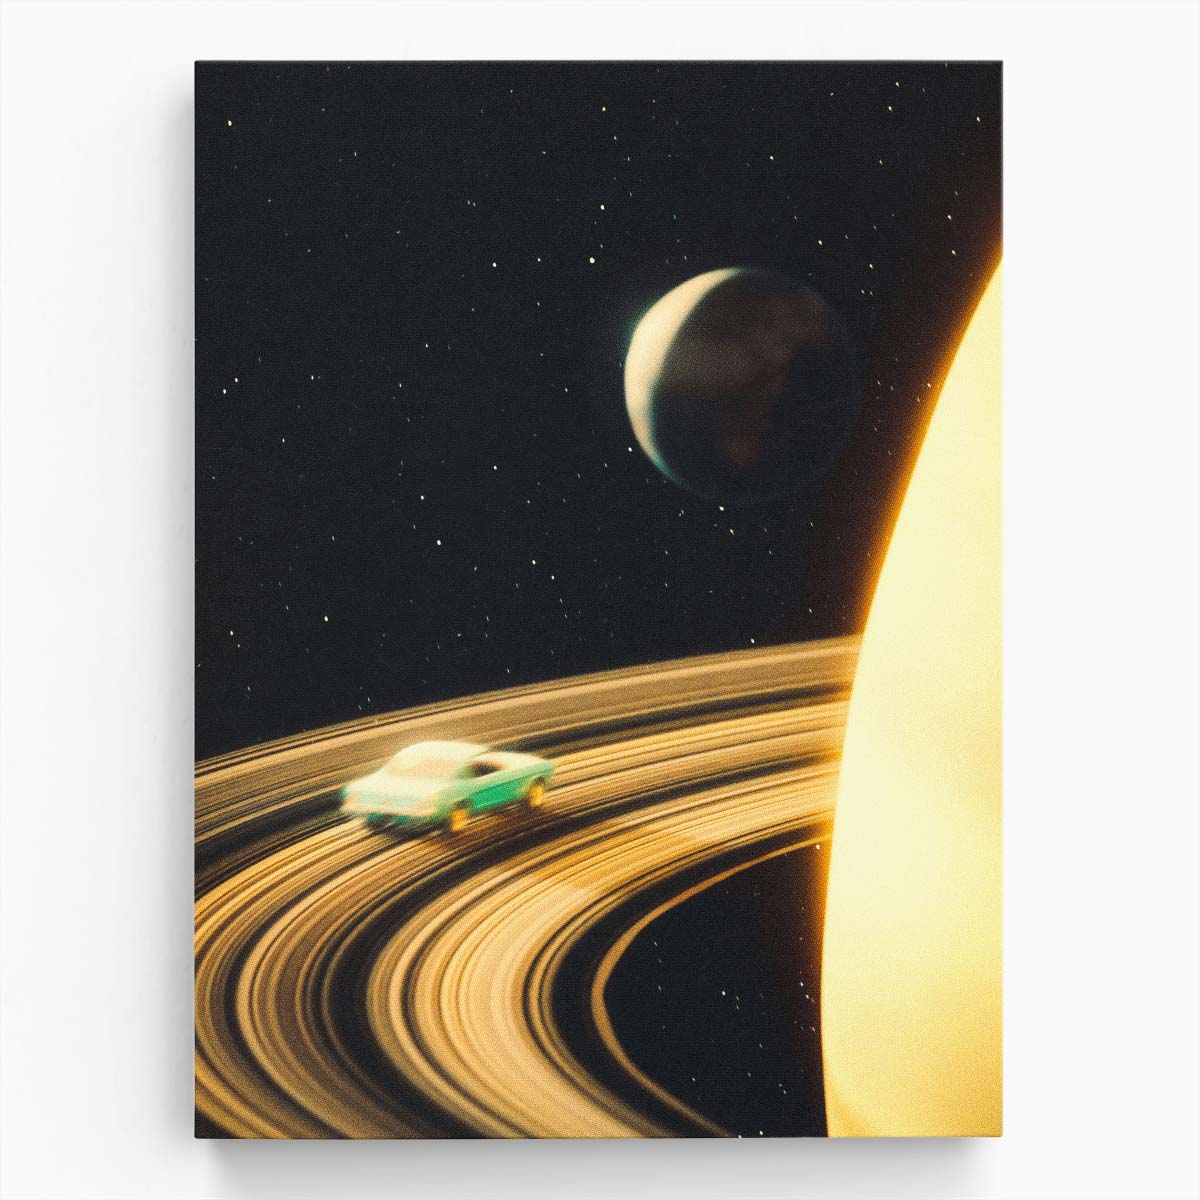 Surreal Saturn Highway Collage - Retro Futuristic Space Travel Art by Luxuriance Designs, made in USA